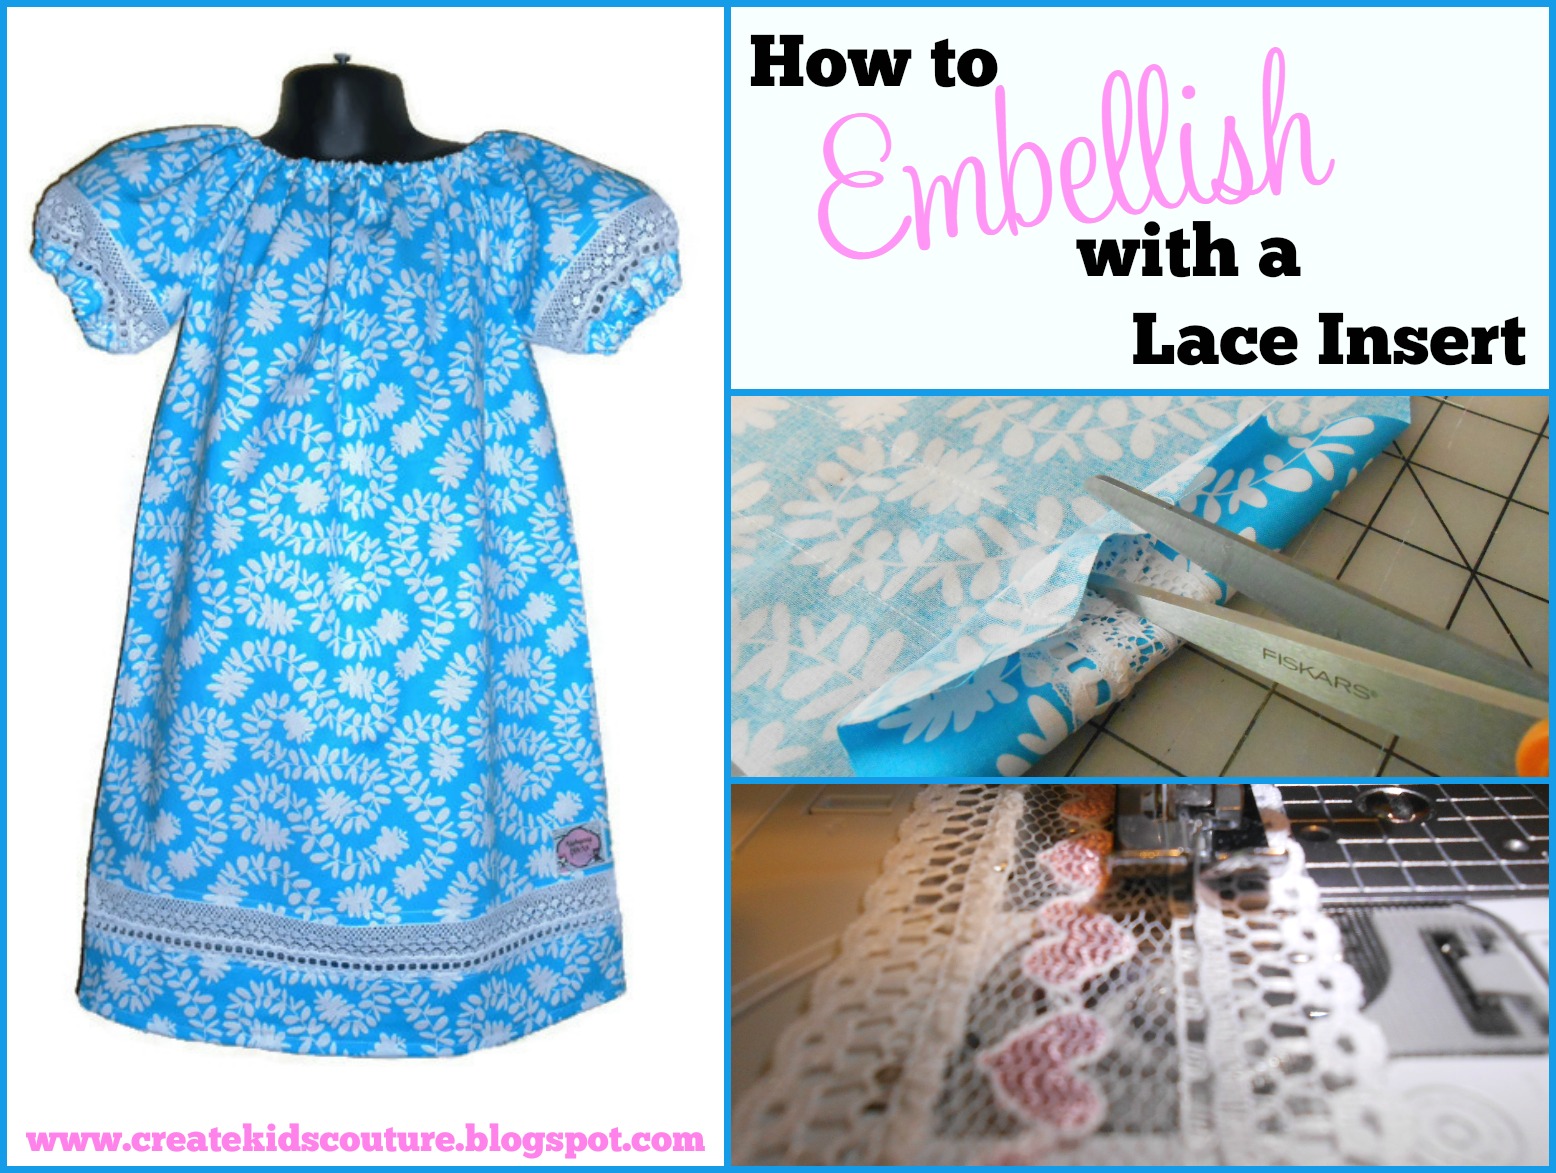 Create Kids Couture: How to Embellish with a Lace Insert